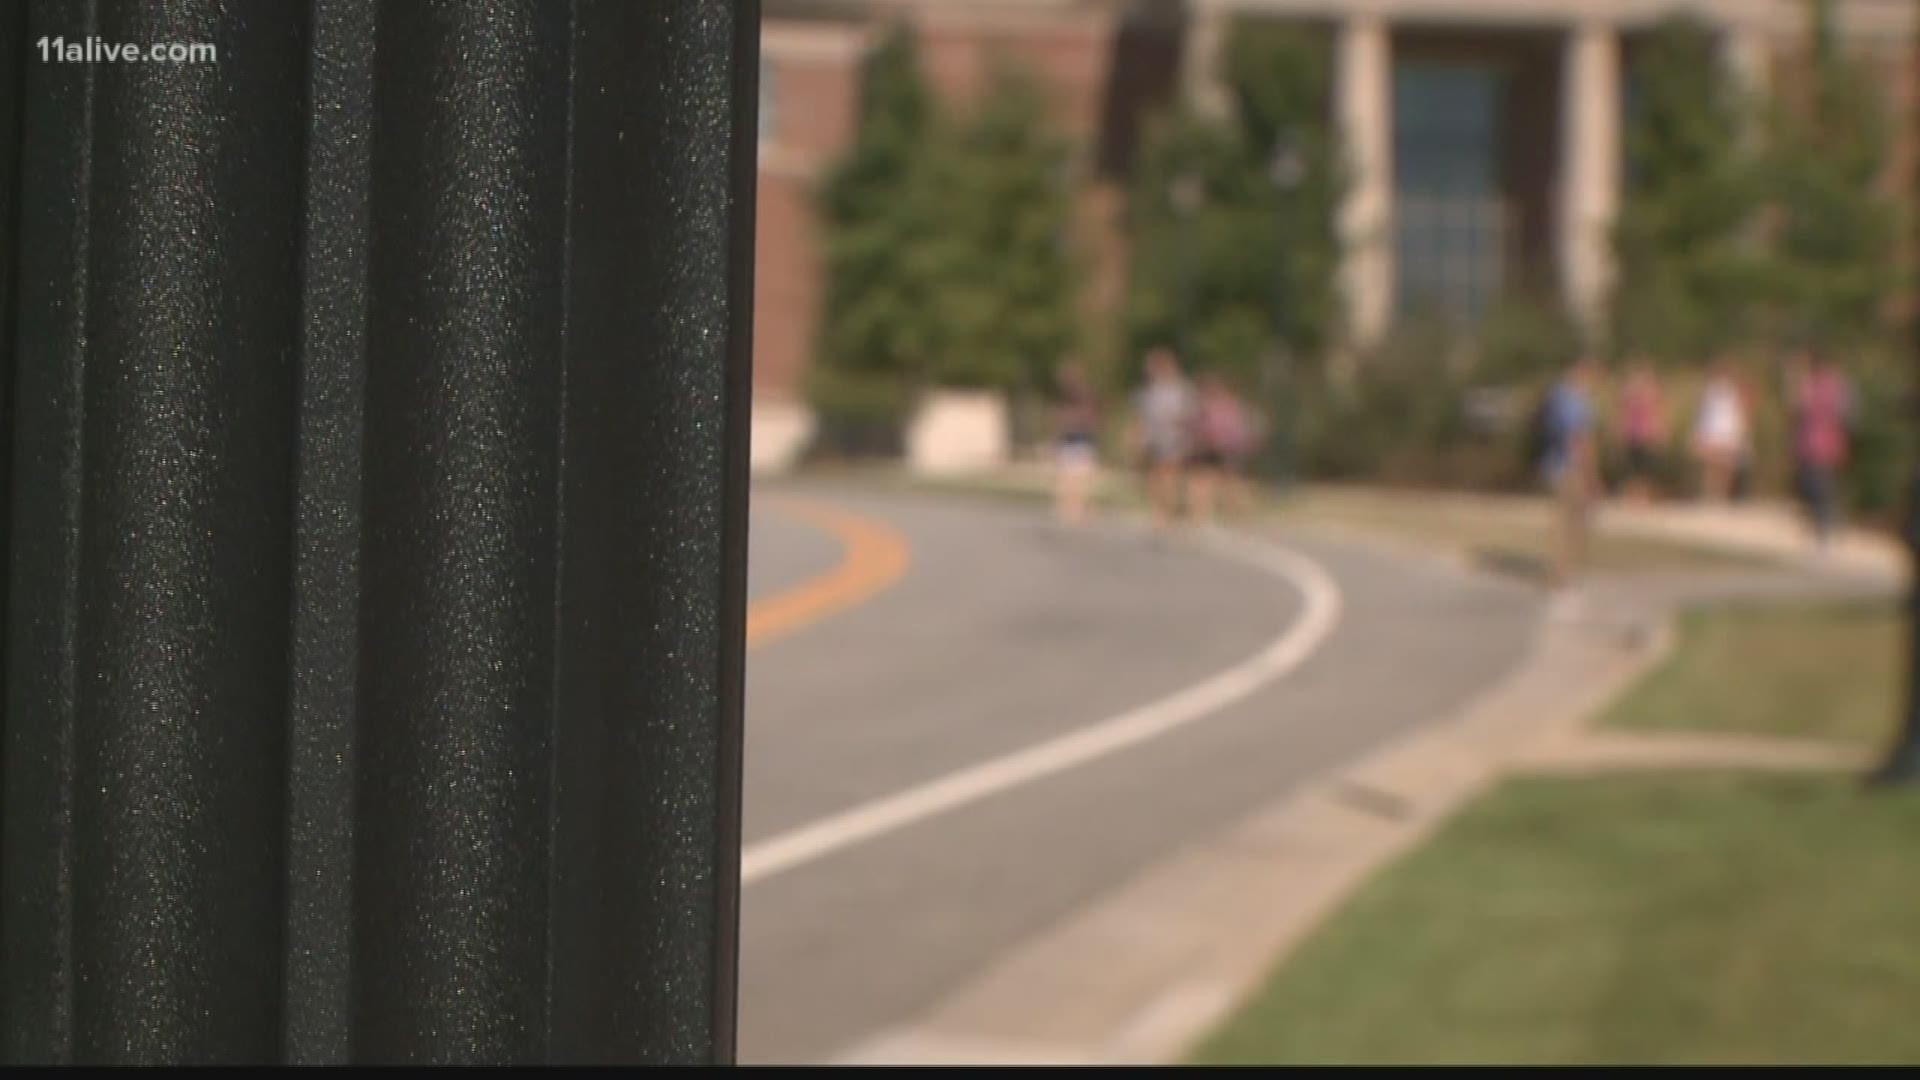 Tuition to Georgia’s state colleges is much cheaper for Georgia residents than it is for students who don’t live in Georgia.